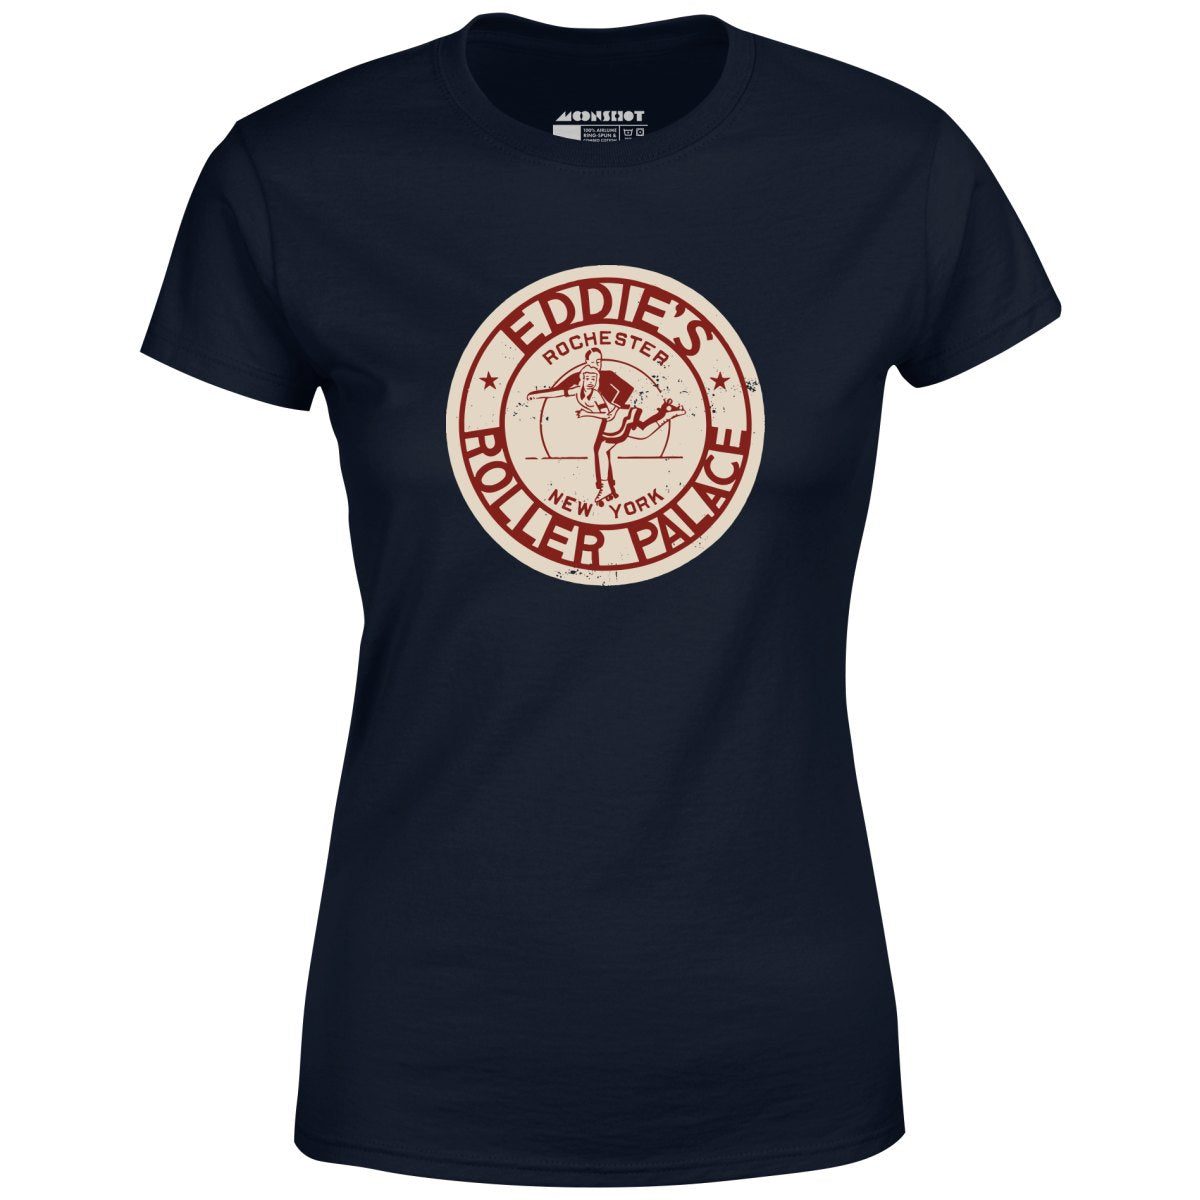 Eddie's Roller Palace - Rochester, NY - Vintage Roller Rink - Women's T-Shirt